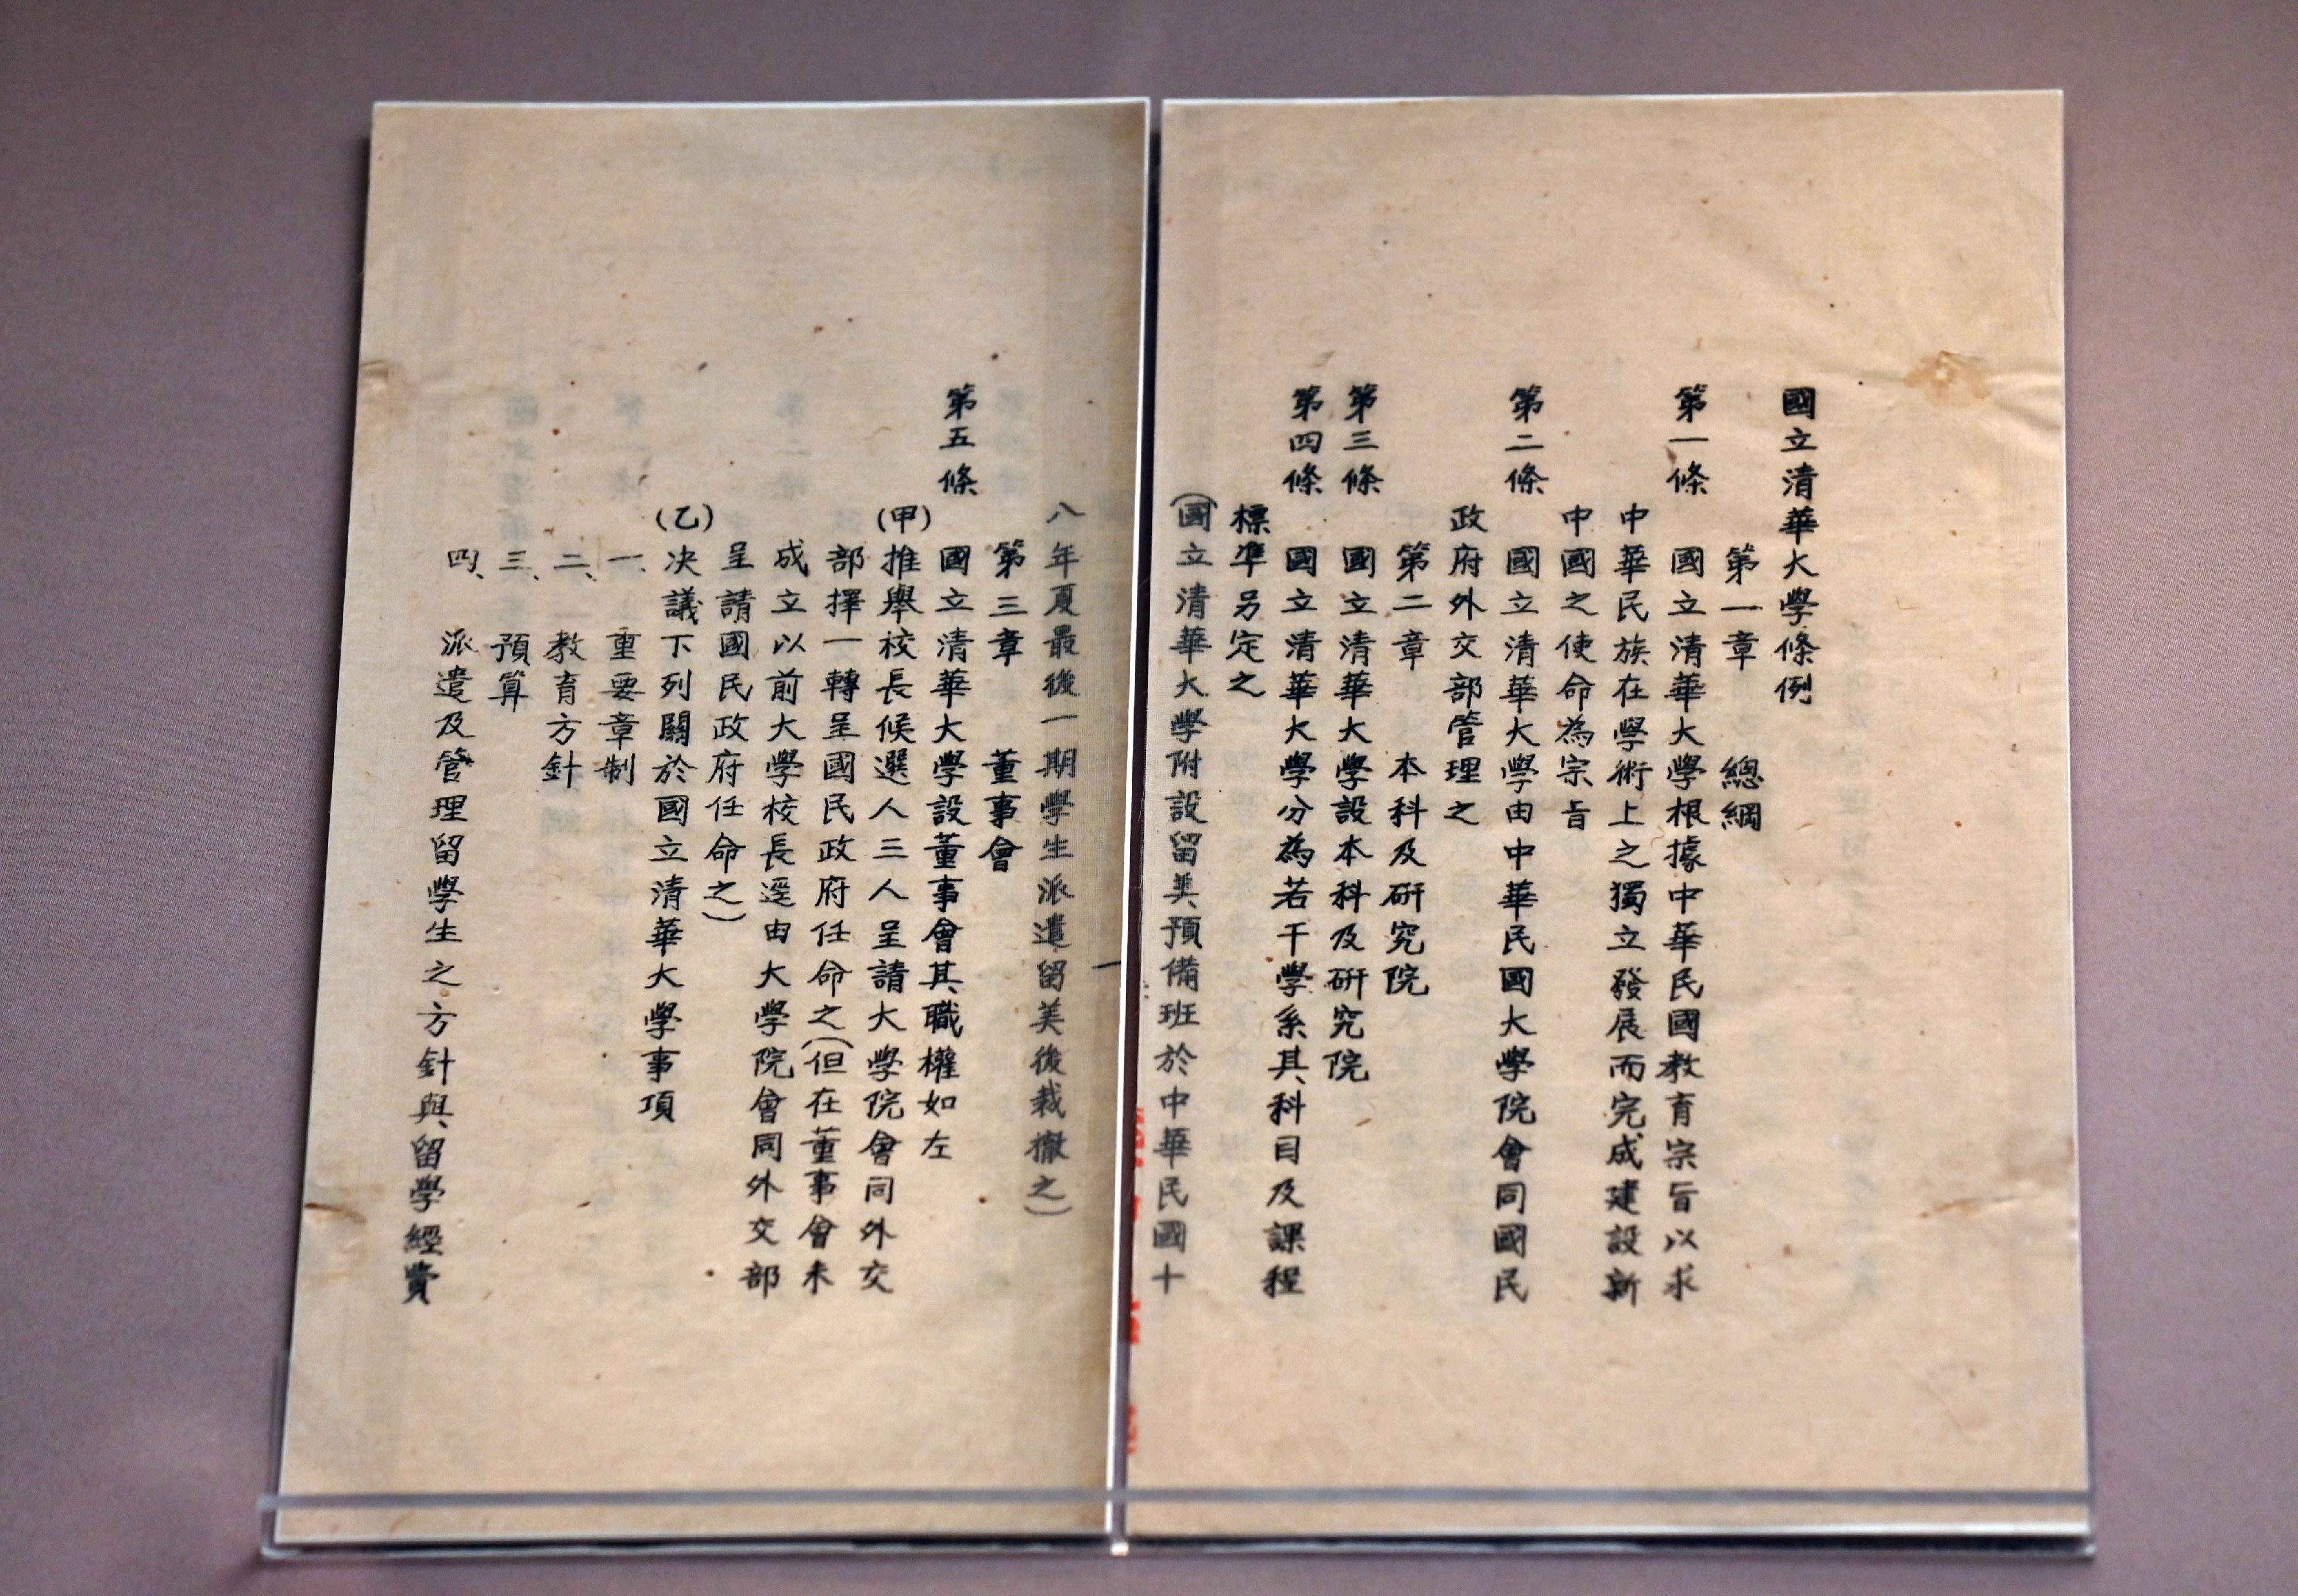 The "Self-discipline and Social Commitment: People and Stories of Tsinghua University" Special Exhibition will run from today (January 26) until May 31 at the Dr Sun Yat-sen Museum. Photo shows the Regulations of National Tsing Hua University in 1928.